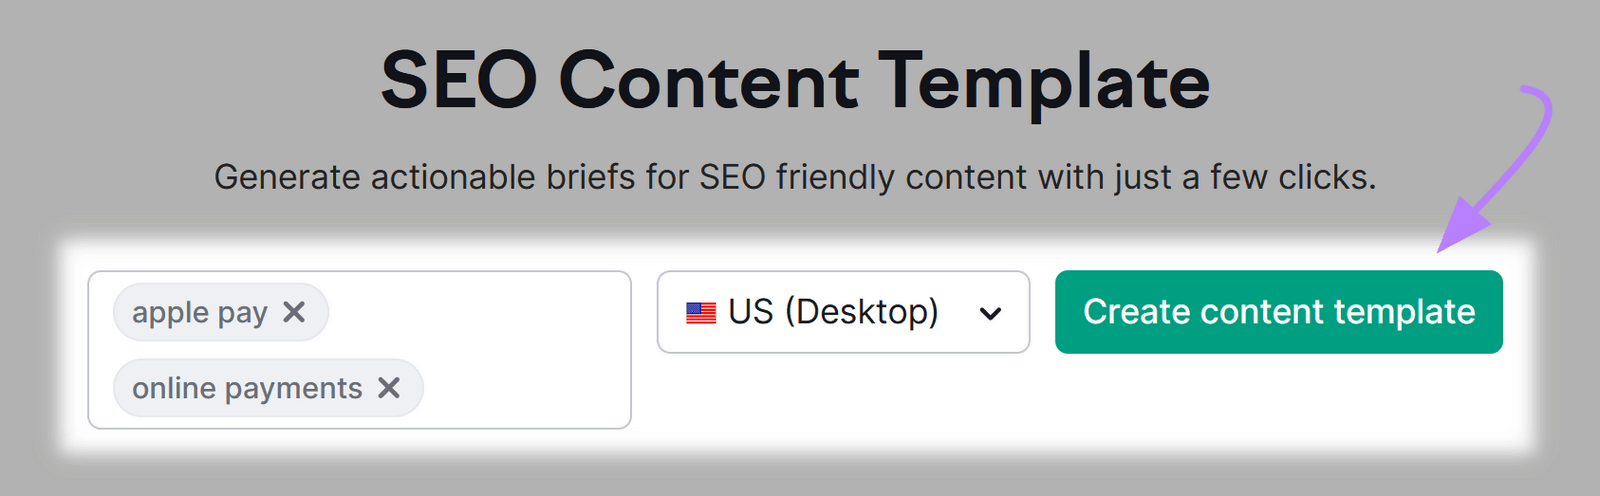 Semrush's SEO Content Template creating a template based on the keywords apple pay and online payments for desktop in the US.